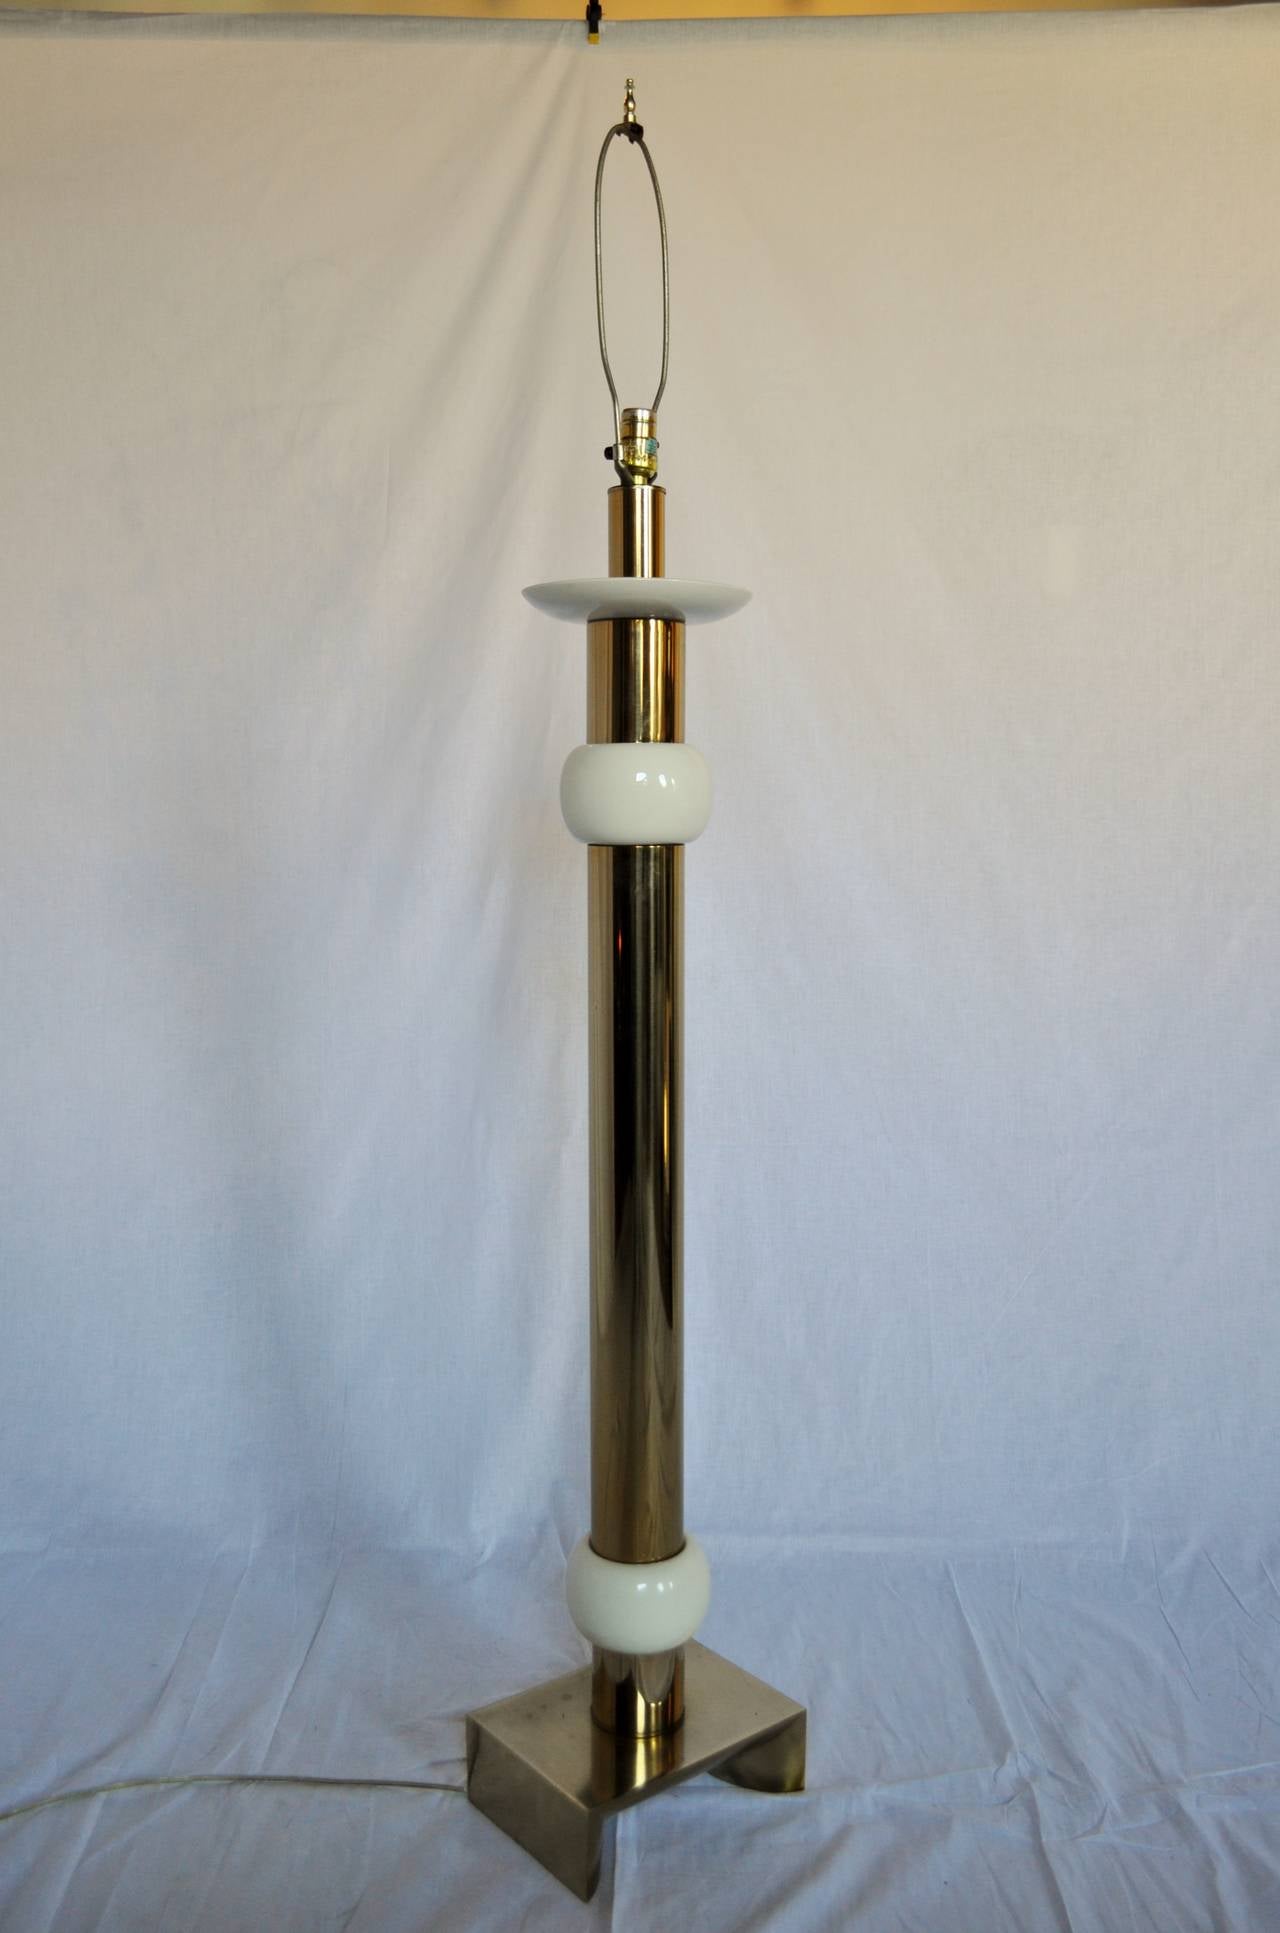 Thick brass column floor lamp by Laurel Lamp Company.  Features cream colored ceramic accents and Asian style pedestal base.  
Original Laurel Lamp sticker on socket.  Wired and in working condition.

Additional Measurements: socket to top of